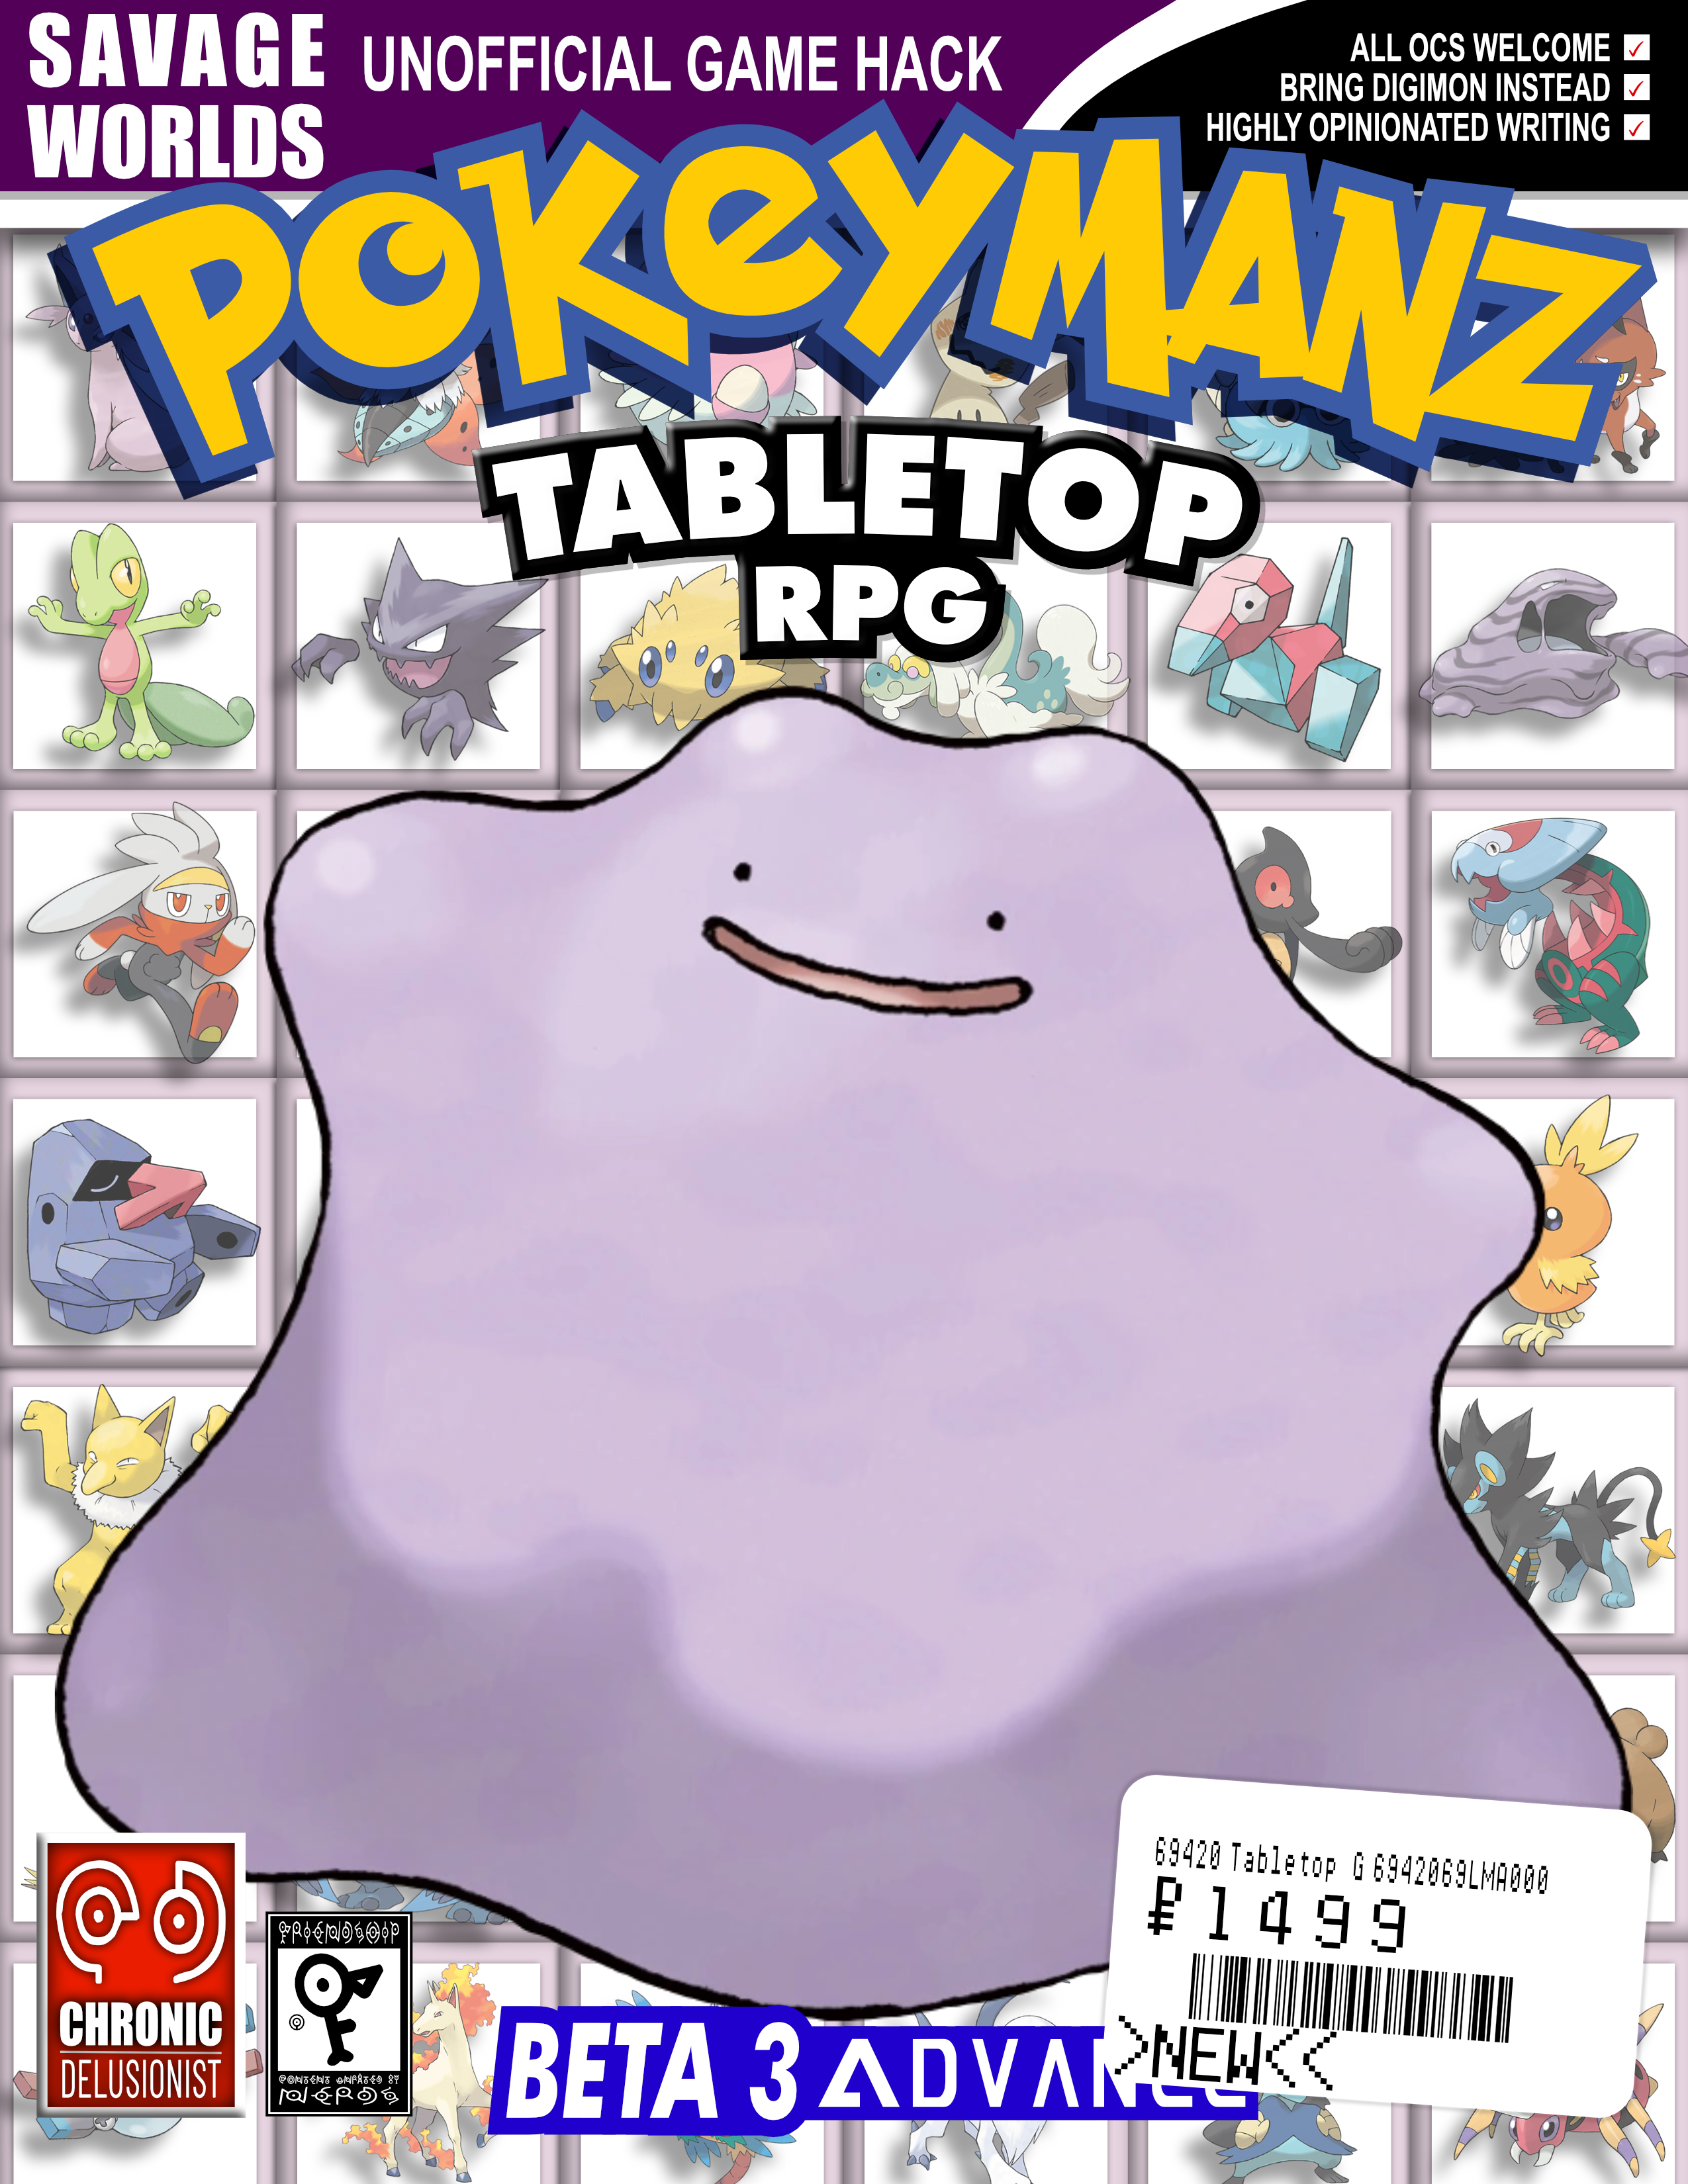 The cover image of the Pokeymanz 'book.'